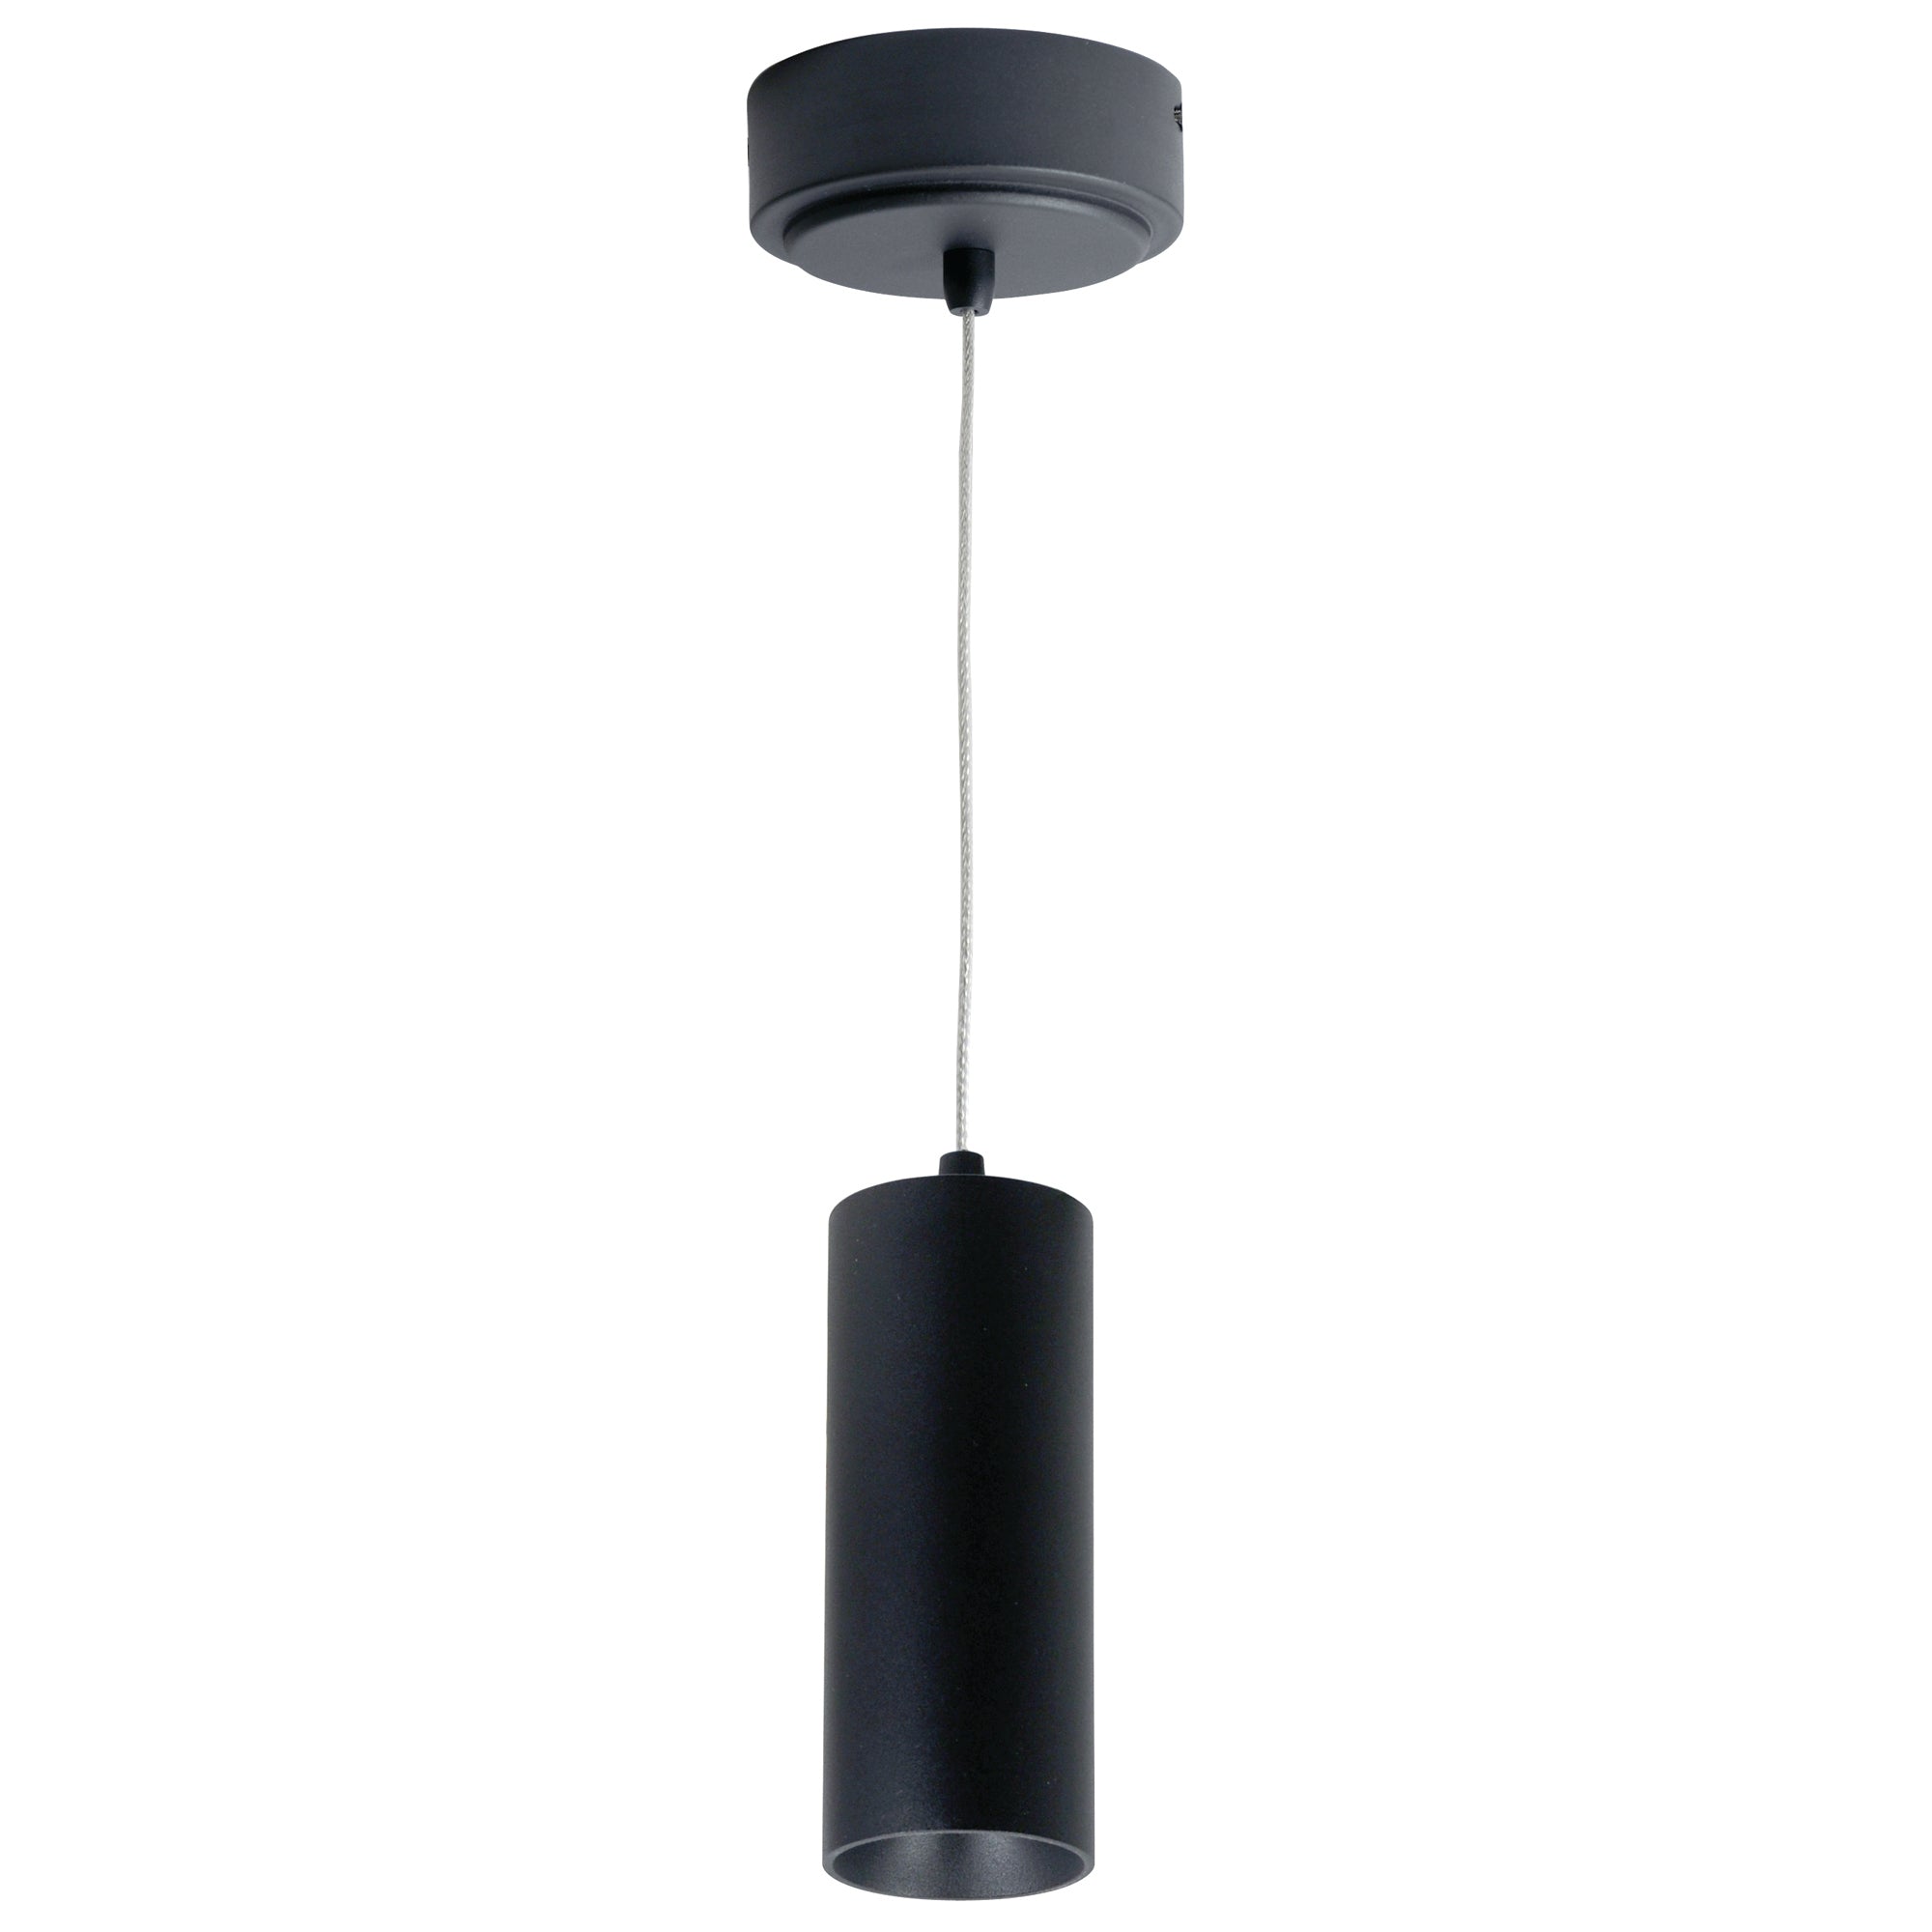 Nora Lighting LE56 - NYLM-2C35XBBLE3A - Cylinder - Black